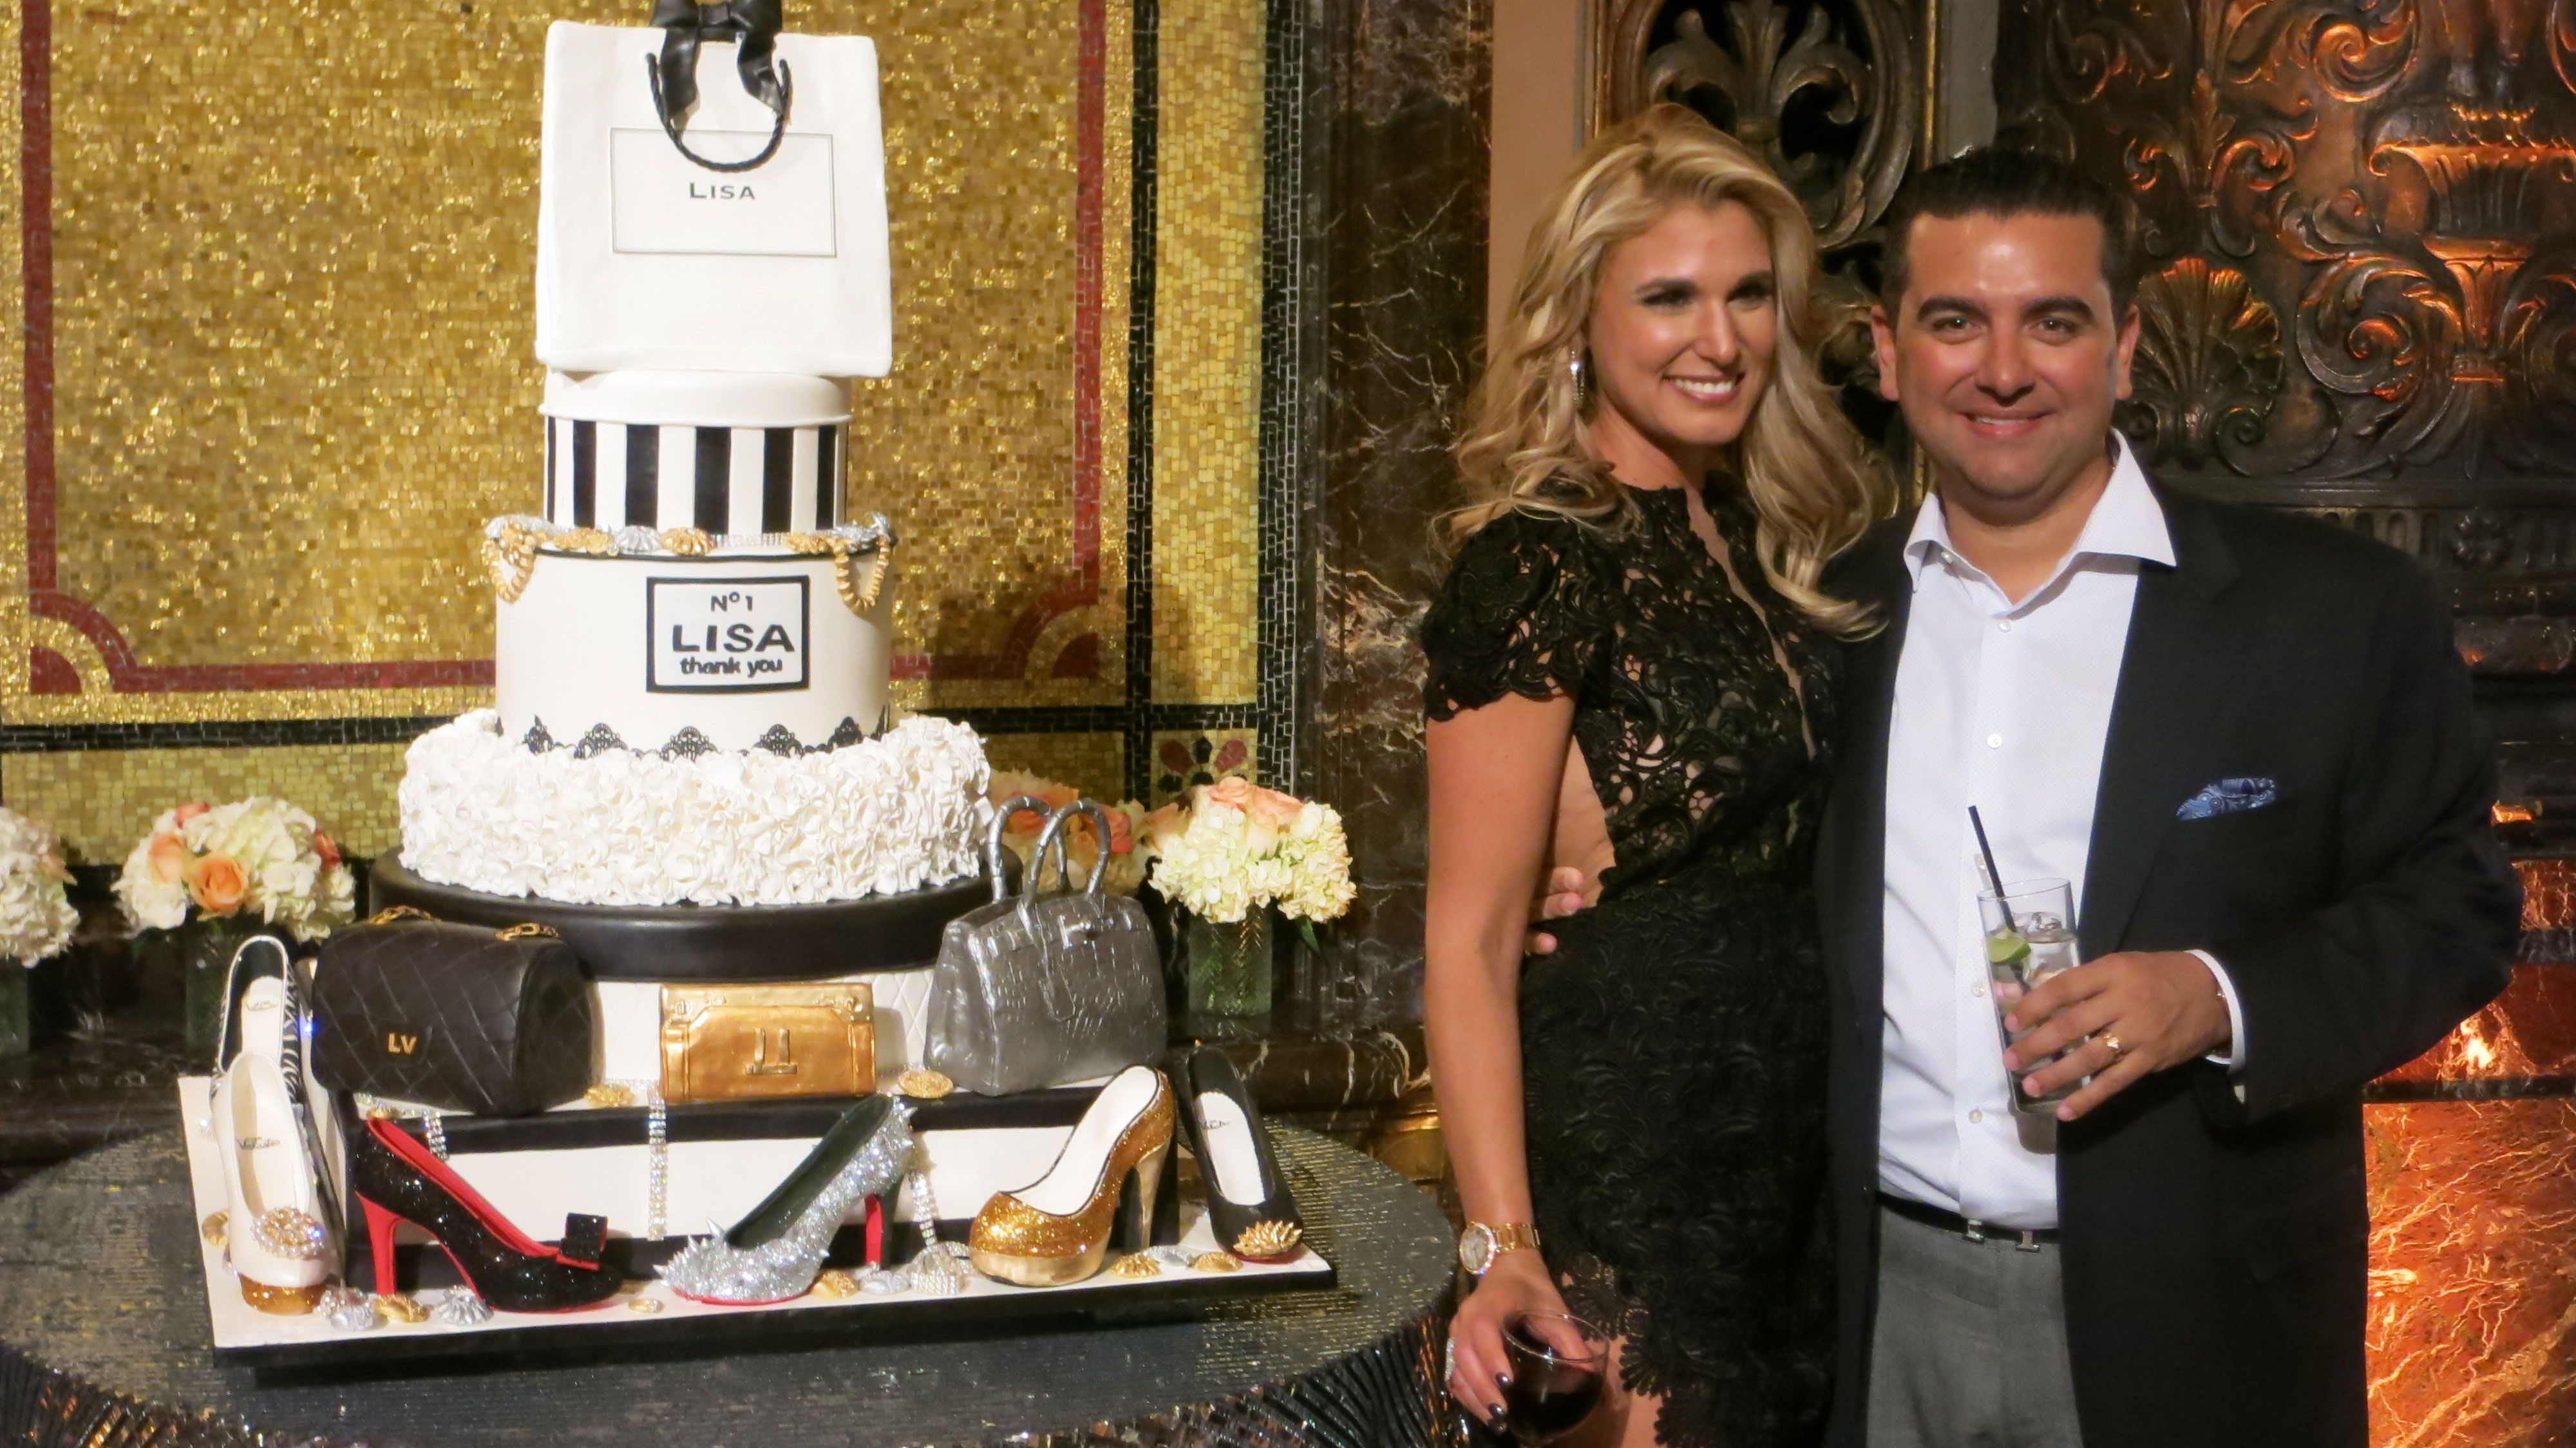 Drama Inde Bare overfyldt Buddy Valastro Throws Party for Wife, Lisa, on "David Tutera's Celebrations"